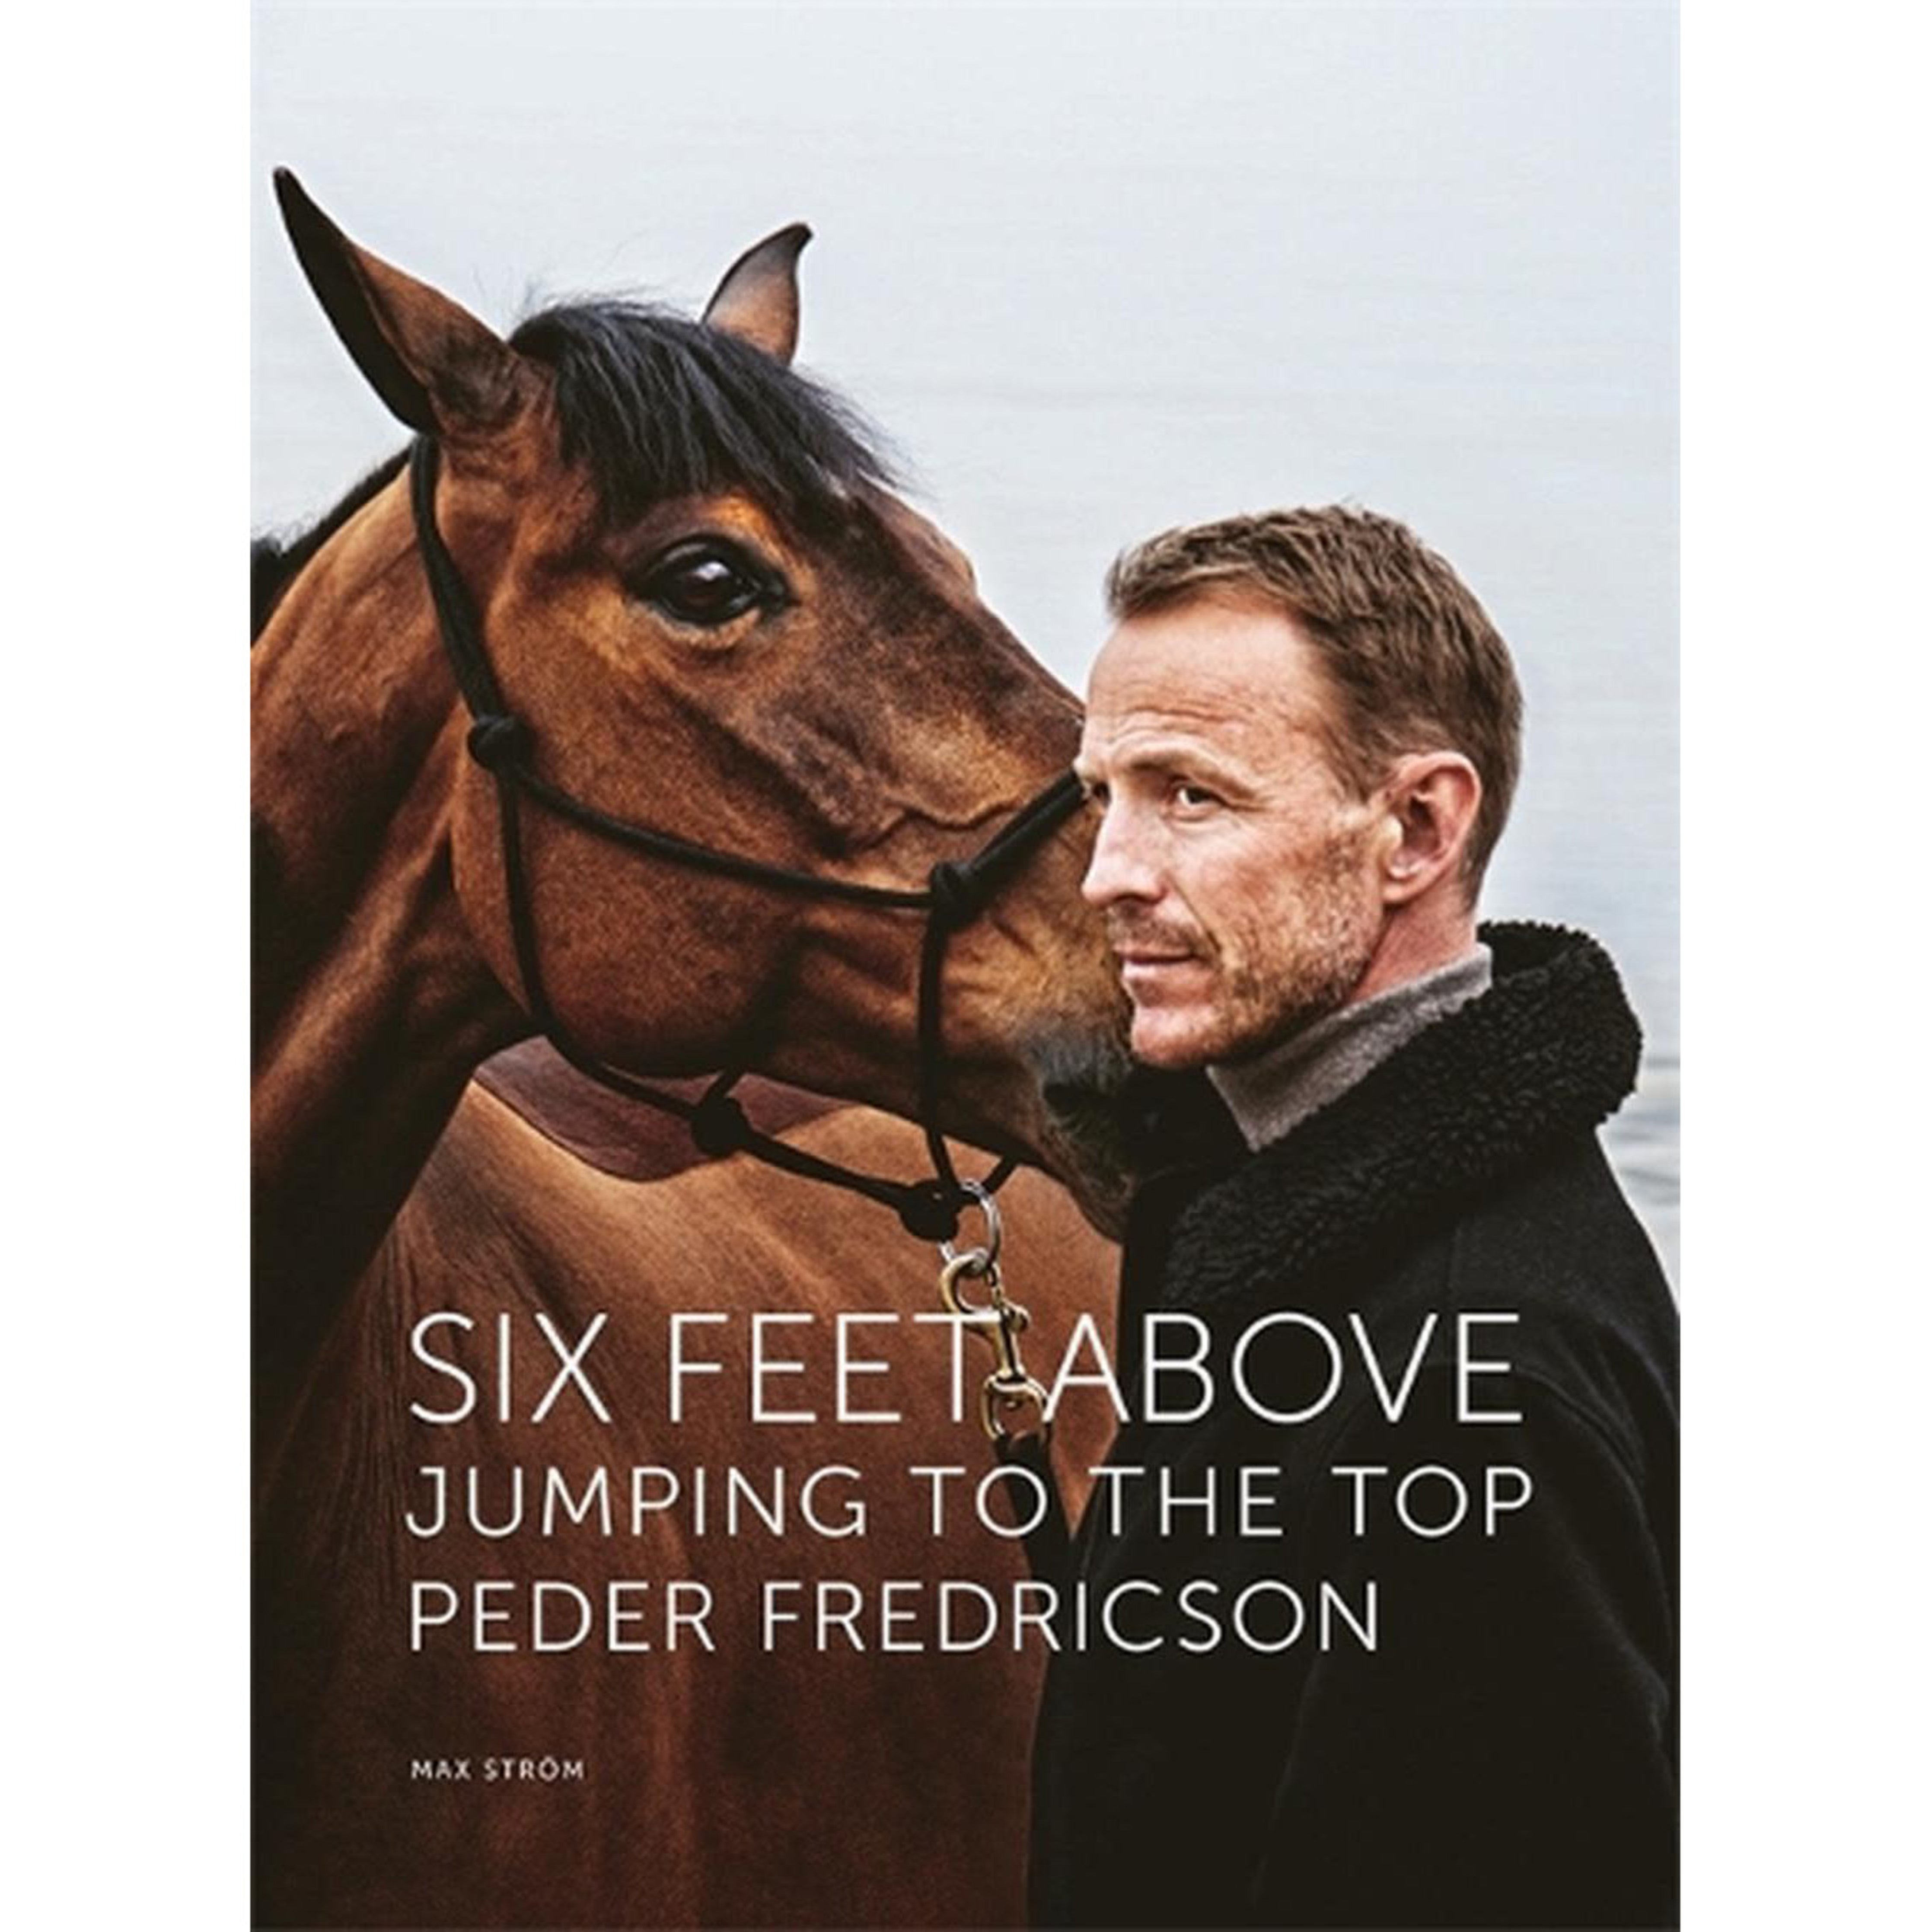 Six Feet Above: Jumping to the Top - Peder Fredricson